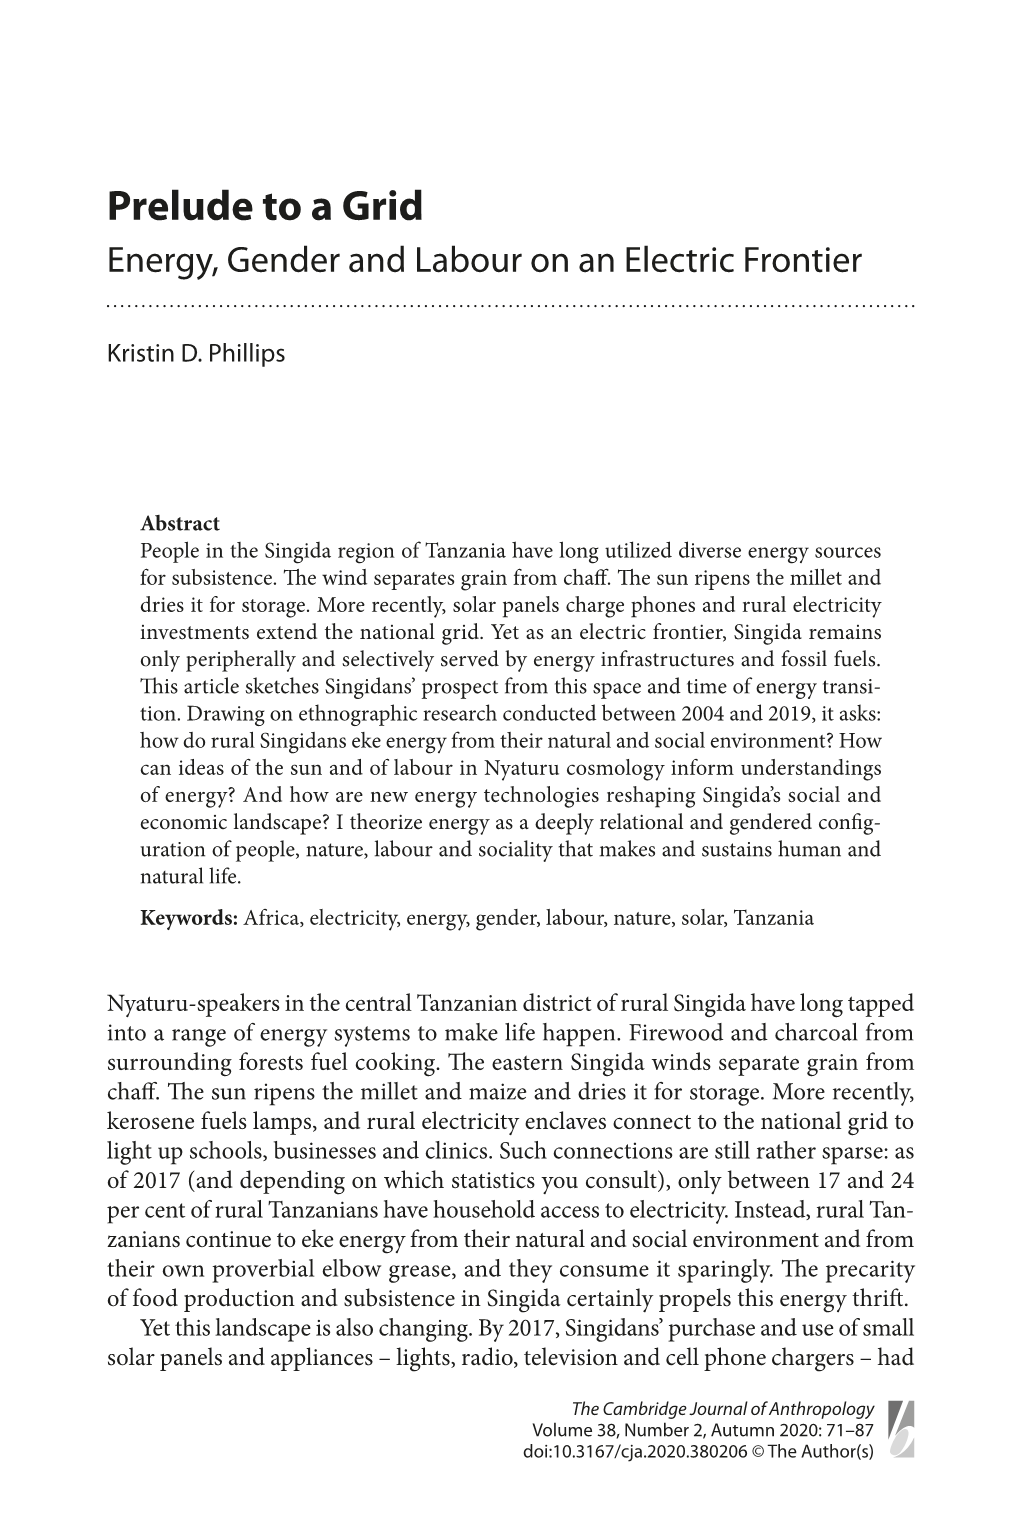 Prelude to a Grid Energy, Gender and Labour on an Electric Frontier